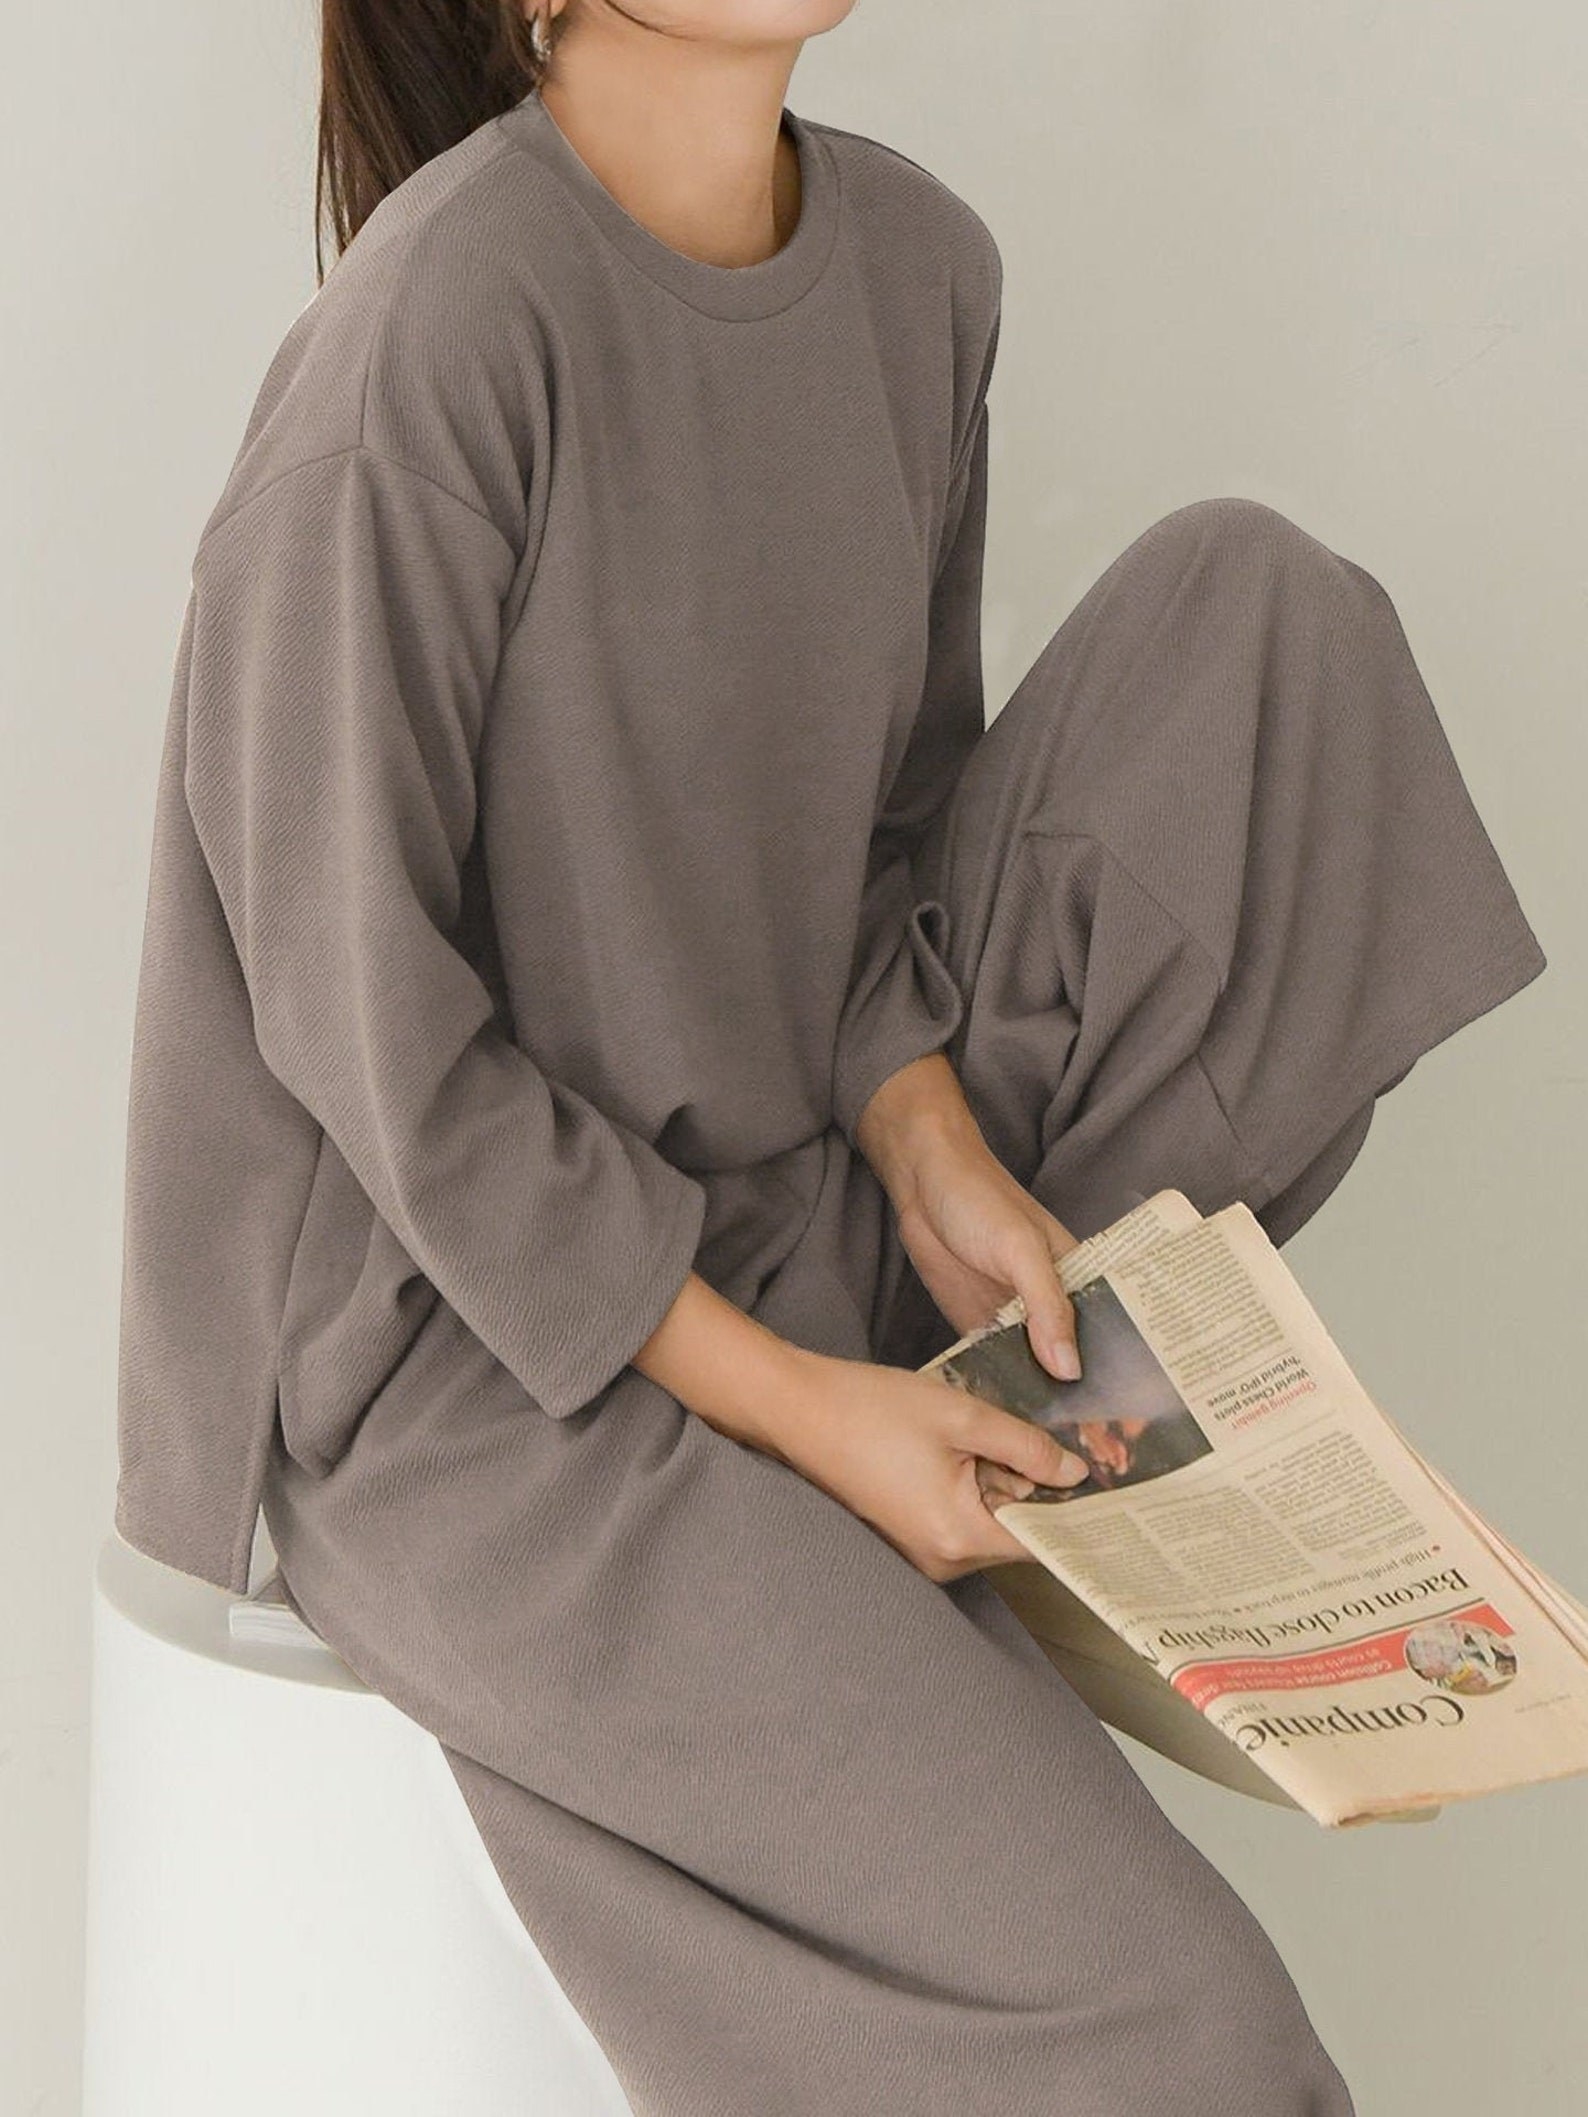 A model wearing the set in gray while reading a book